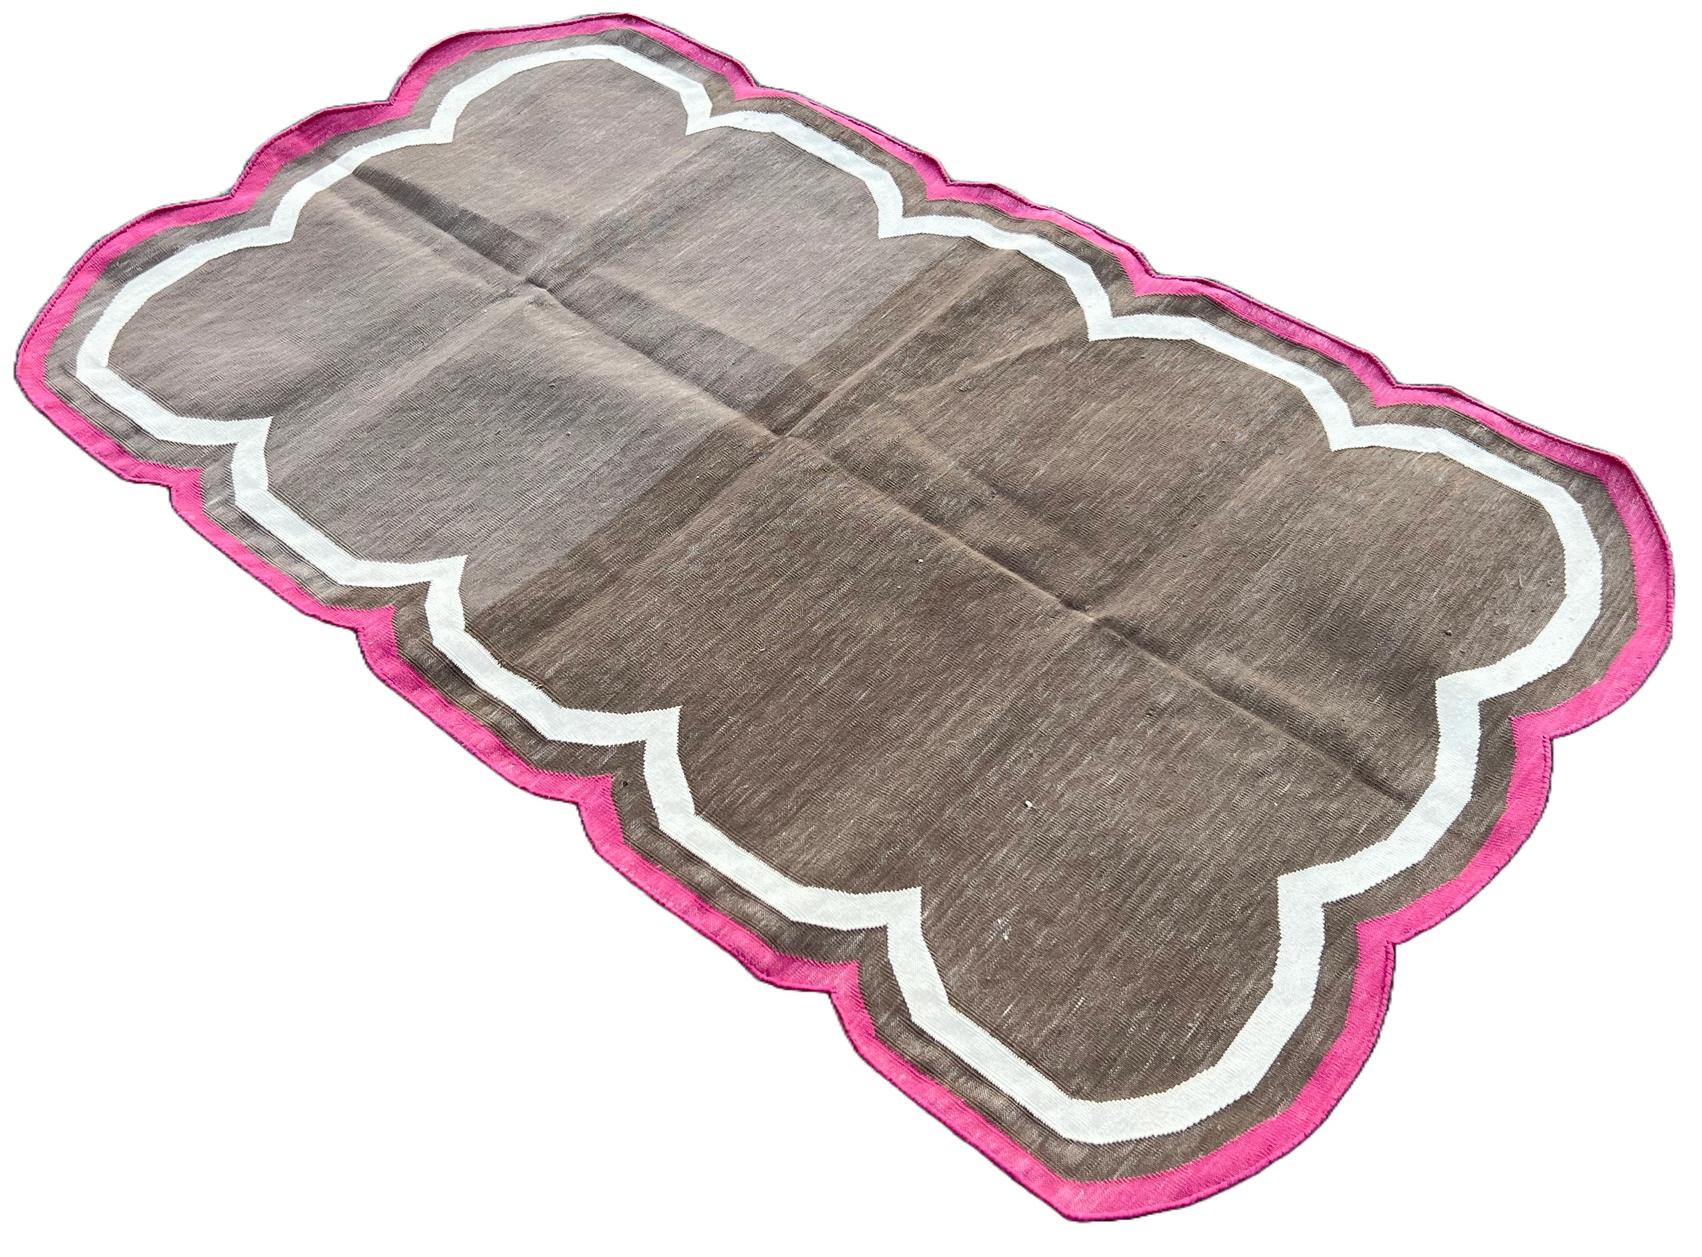 Cotton Vegetable Dyed Brown, Cream And Raspberry Pink Four Sided Scalloped Rug-3'x5' 
(Scallops runs on all Four Sides)
These special flat-weave dhurries are hand-woven with 15 ply 100% cotton yarn. Due to the special manufacturing techniques used